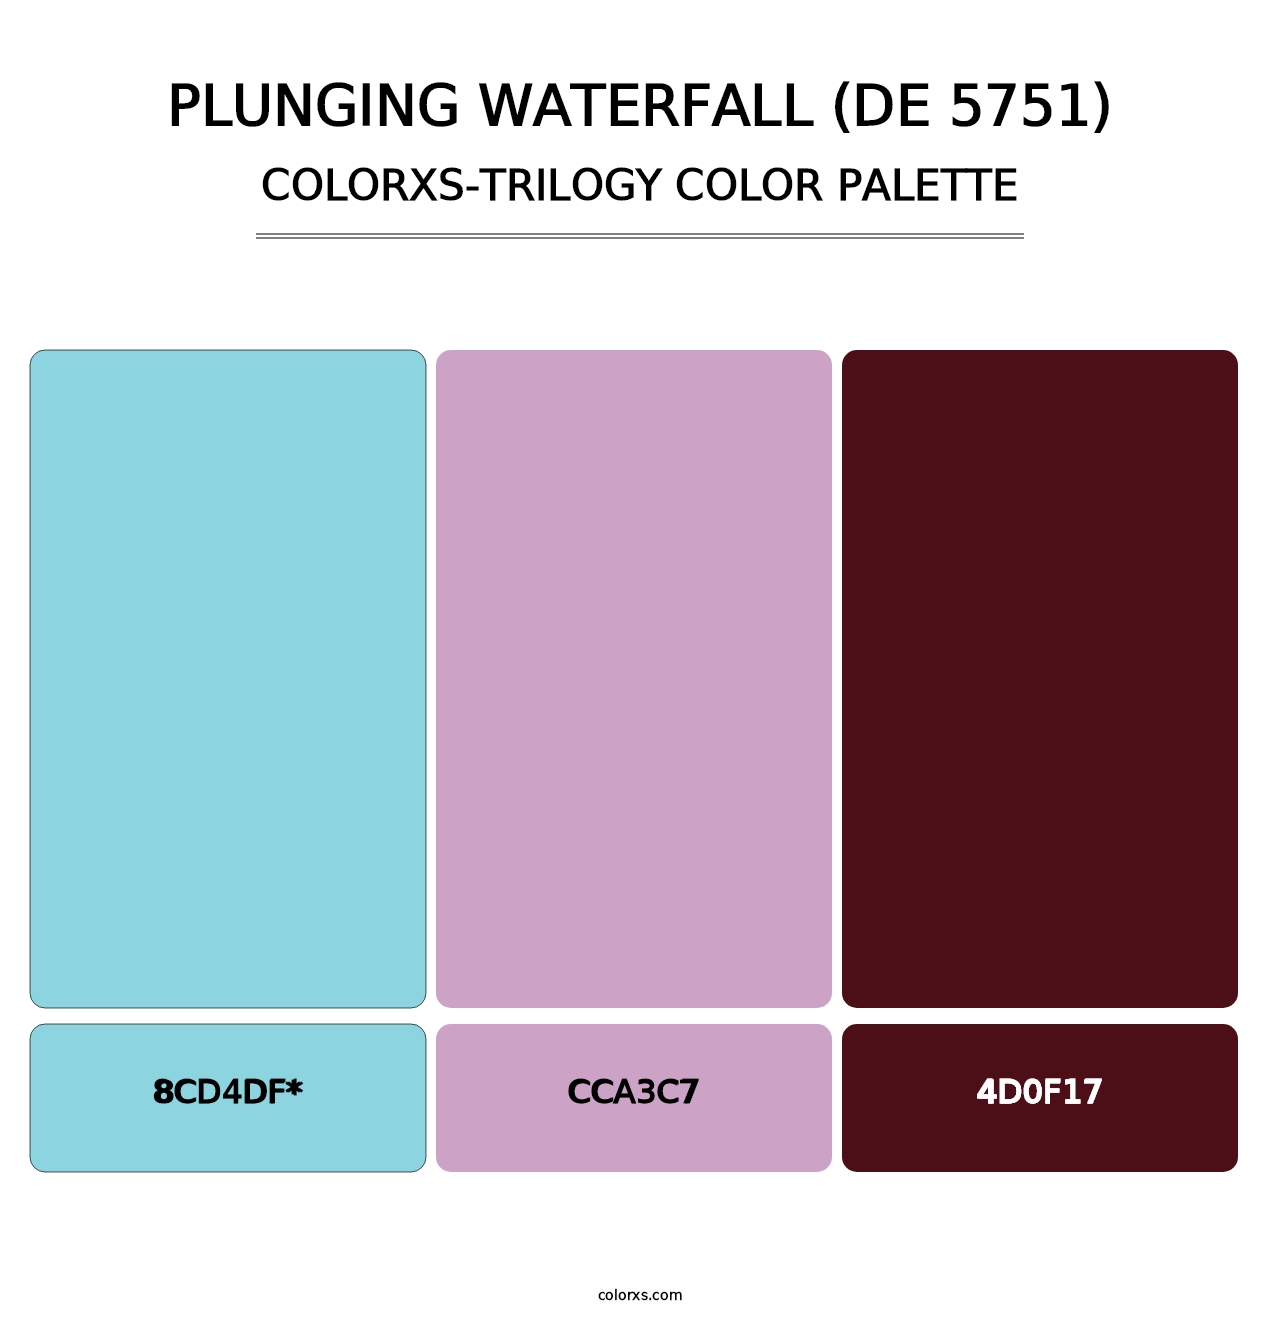 Plunging Waterfall (DE 5751) - Colorxs Trilogy Palette